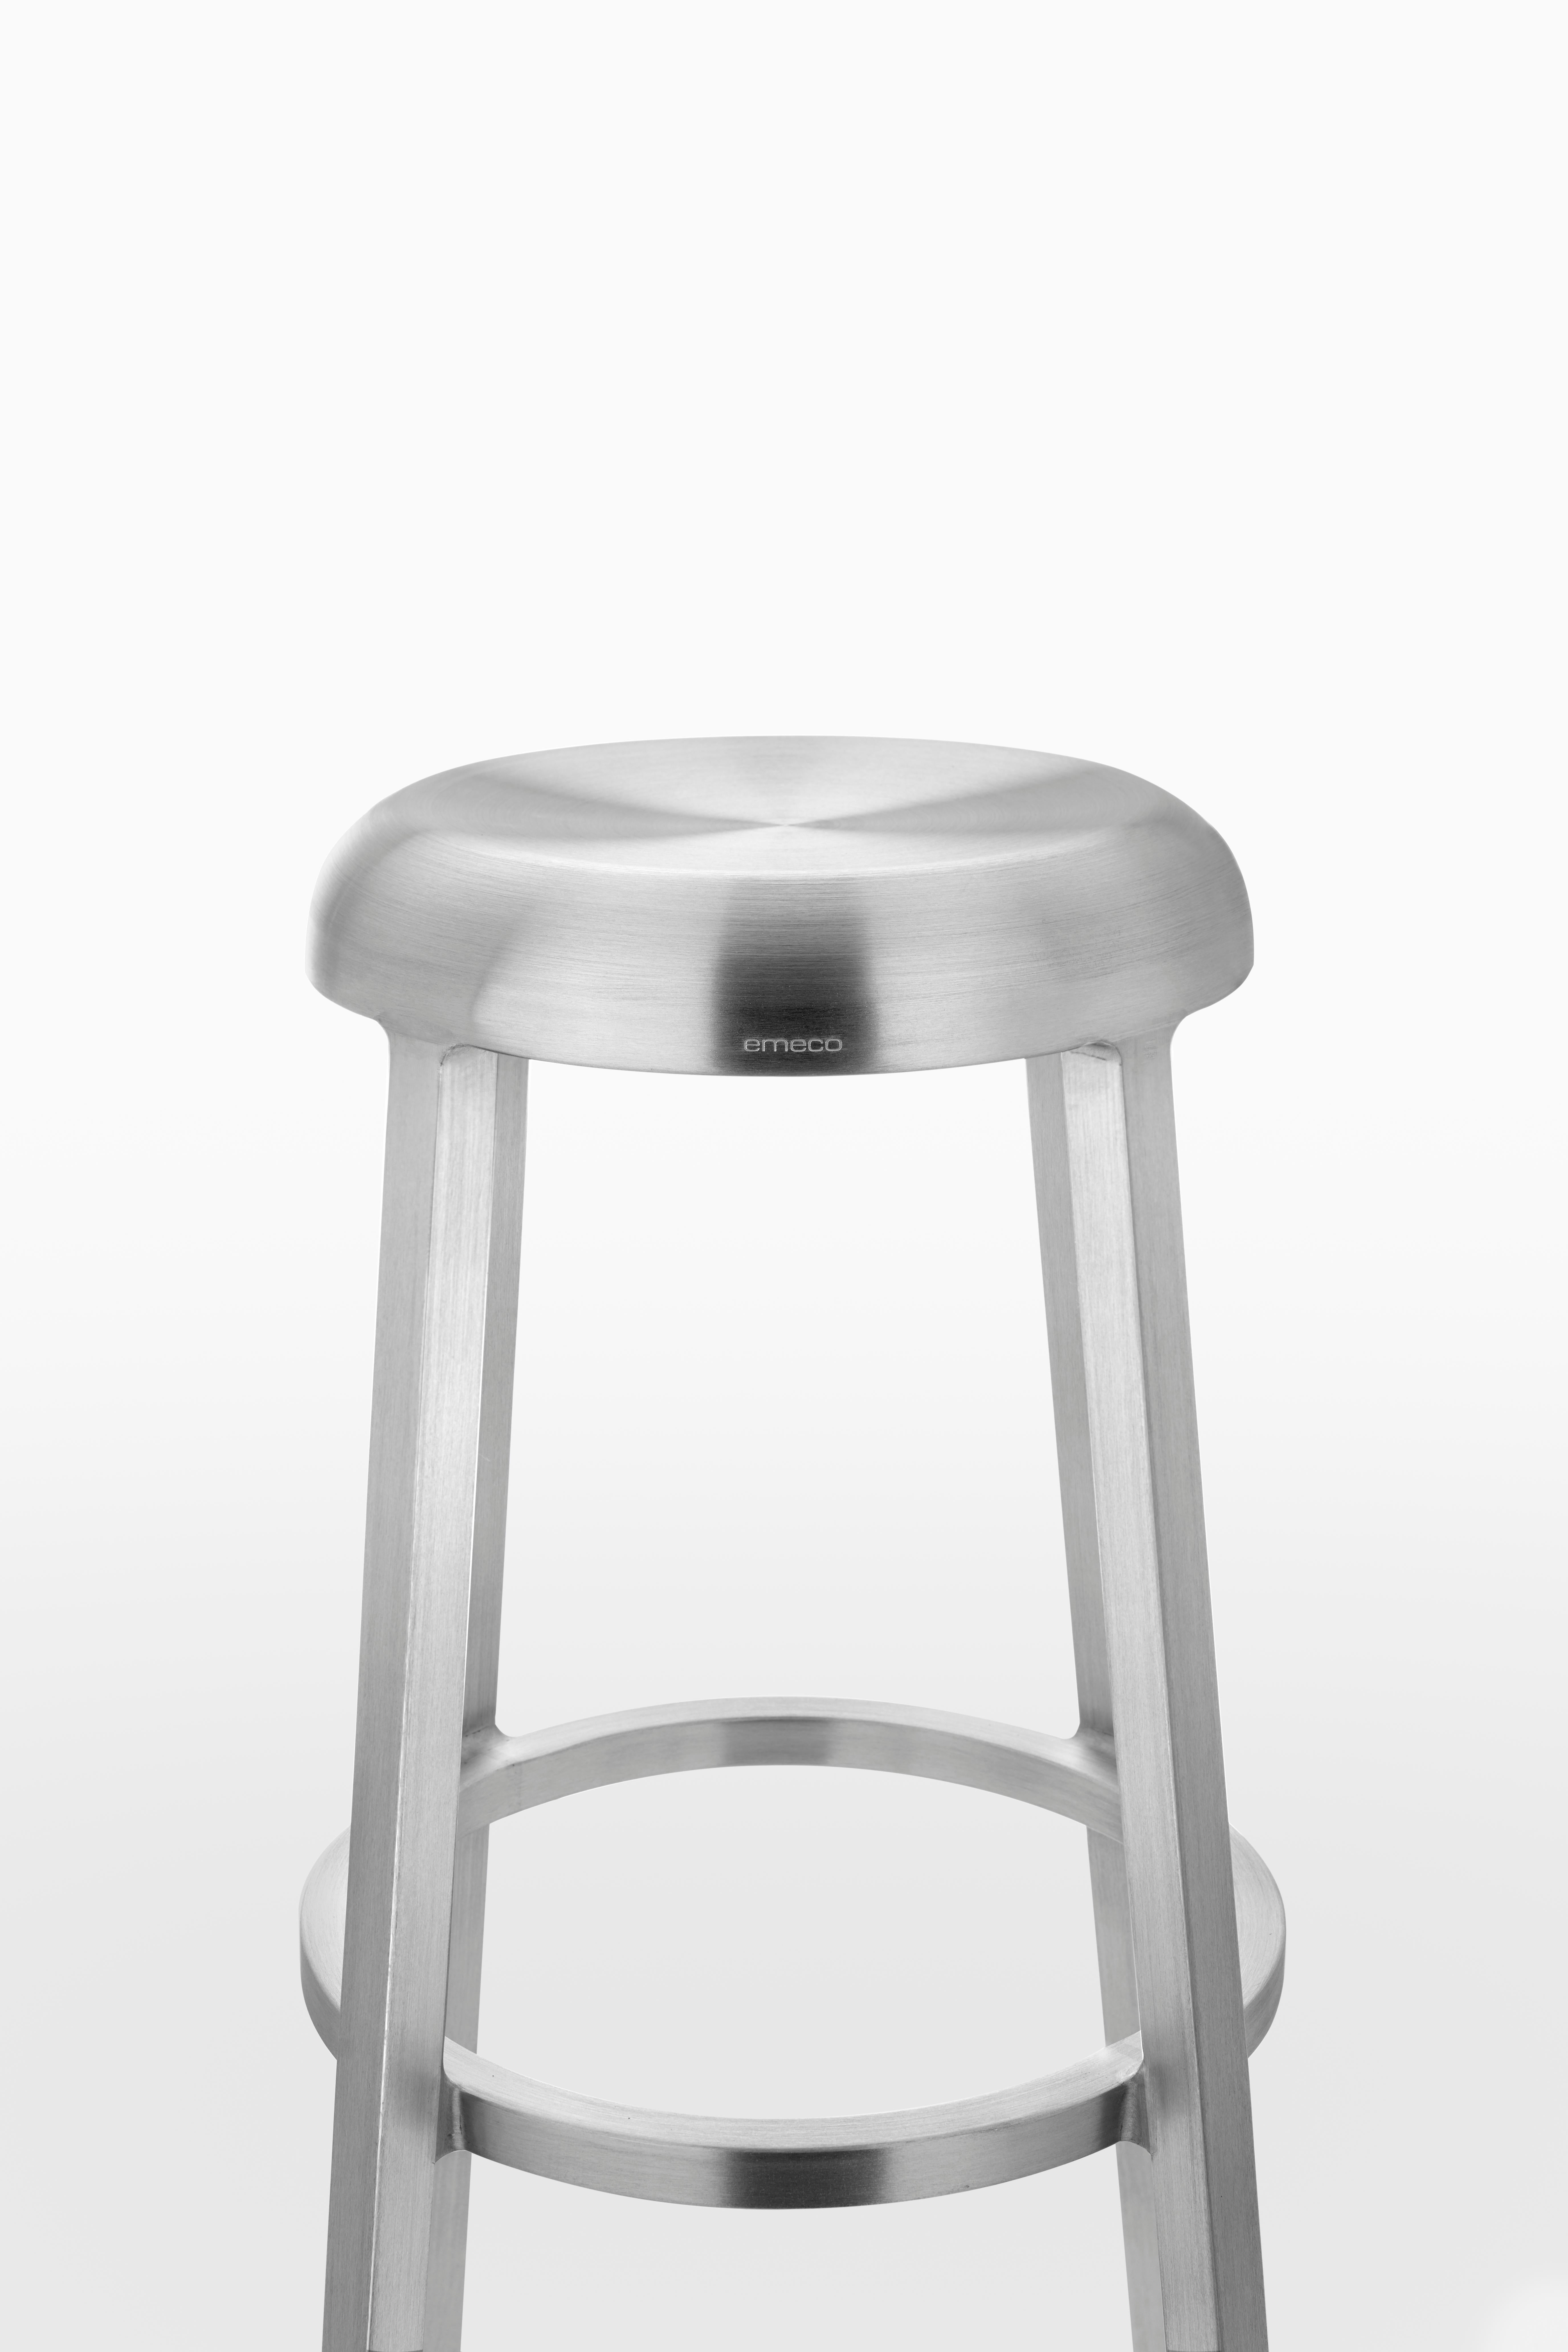 American Emeco ZA Barstool in Brushed Finish by Naoto Fukasawa For Sale